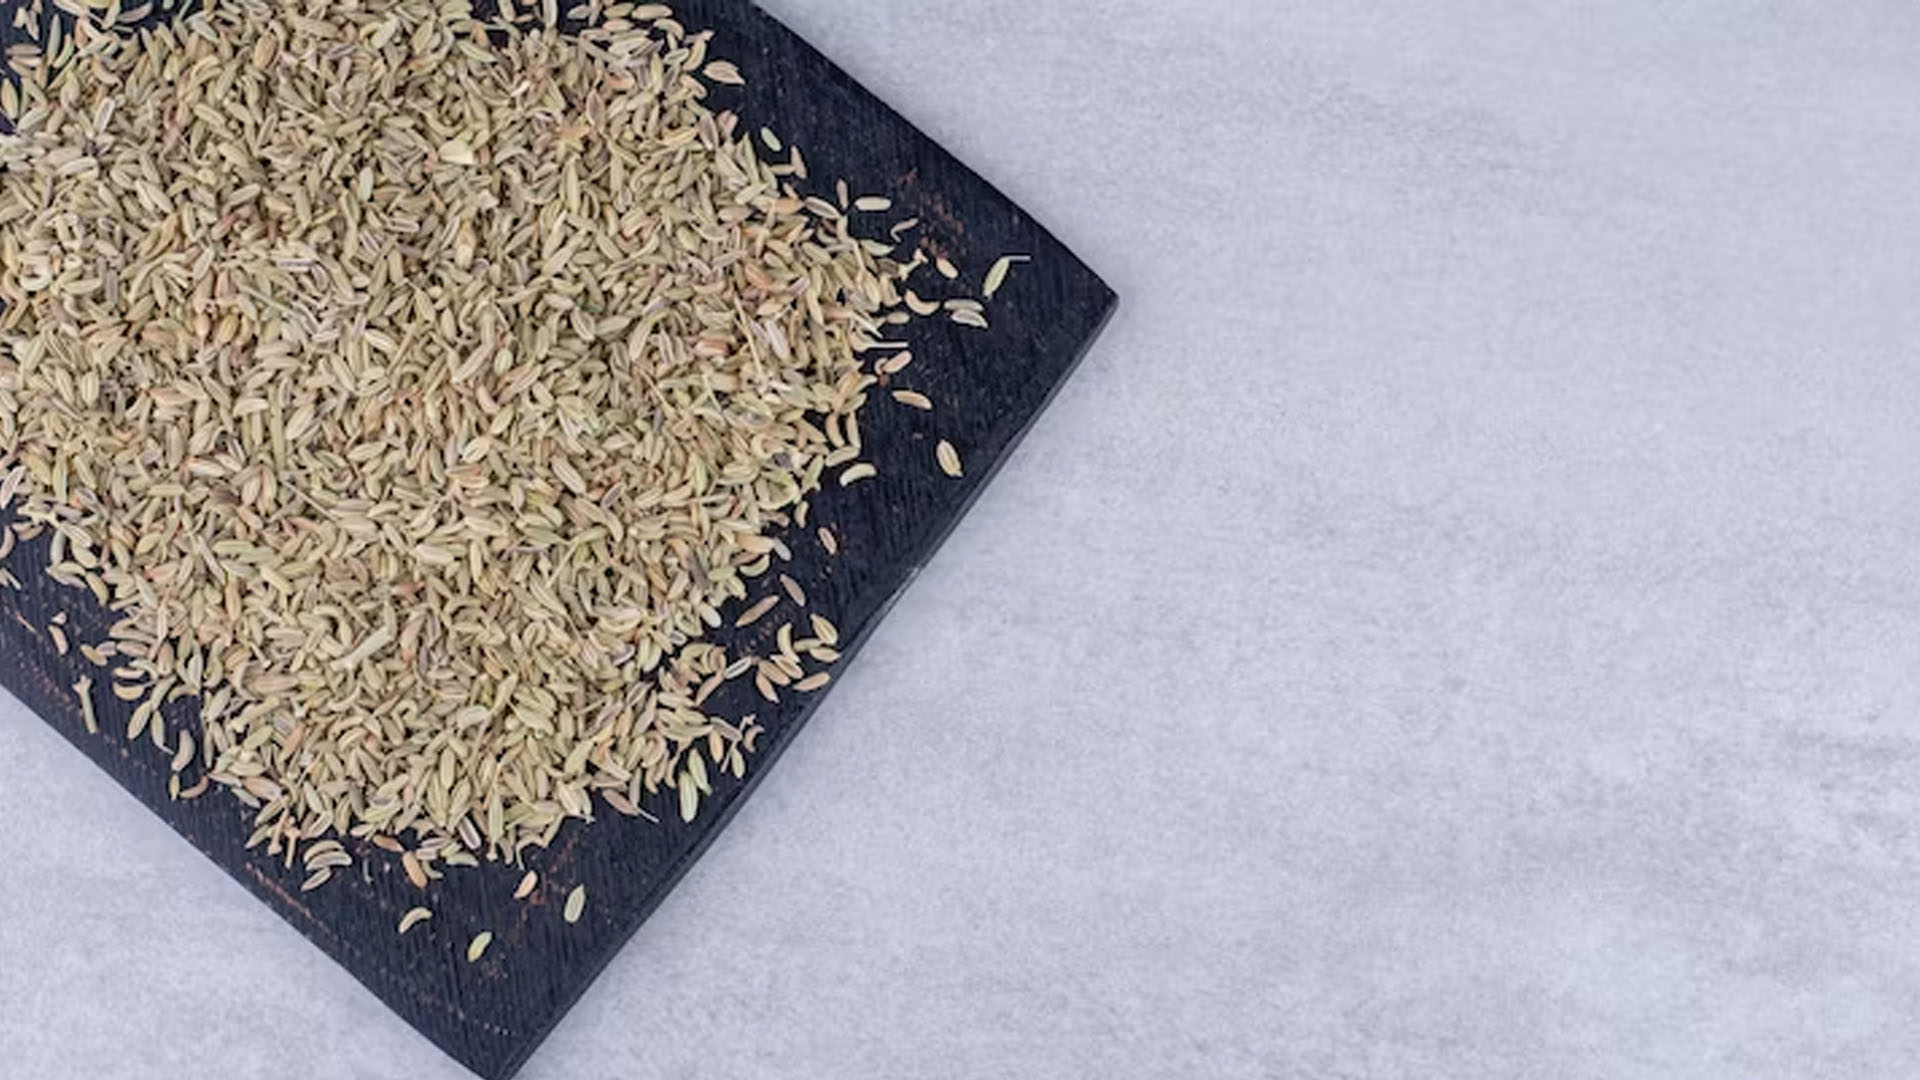 What Are The Health Benefits Of Cumin Seeds?